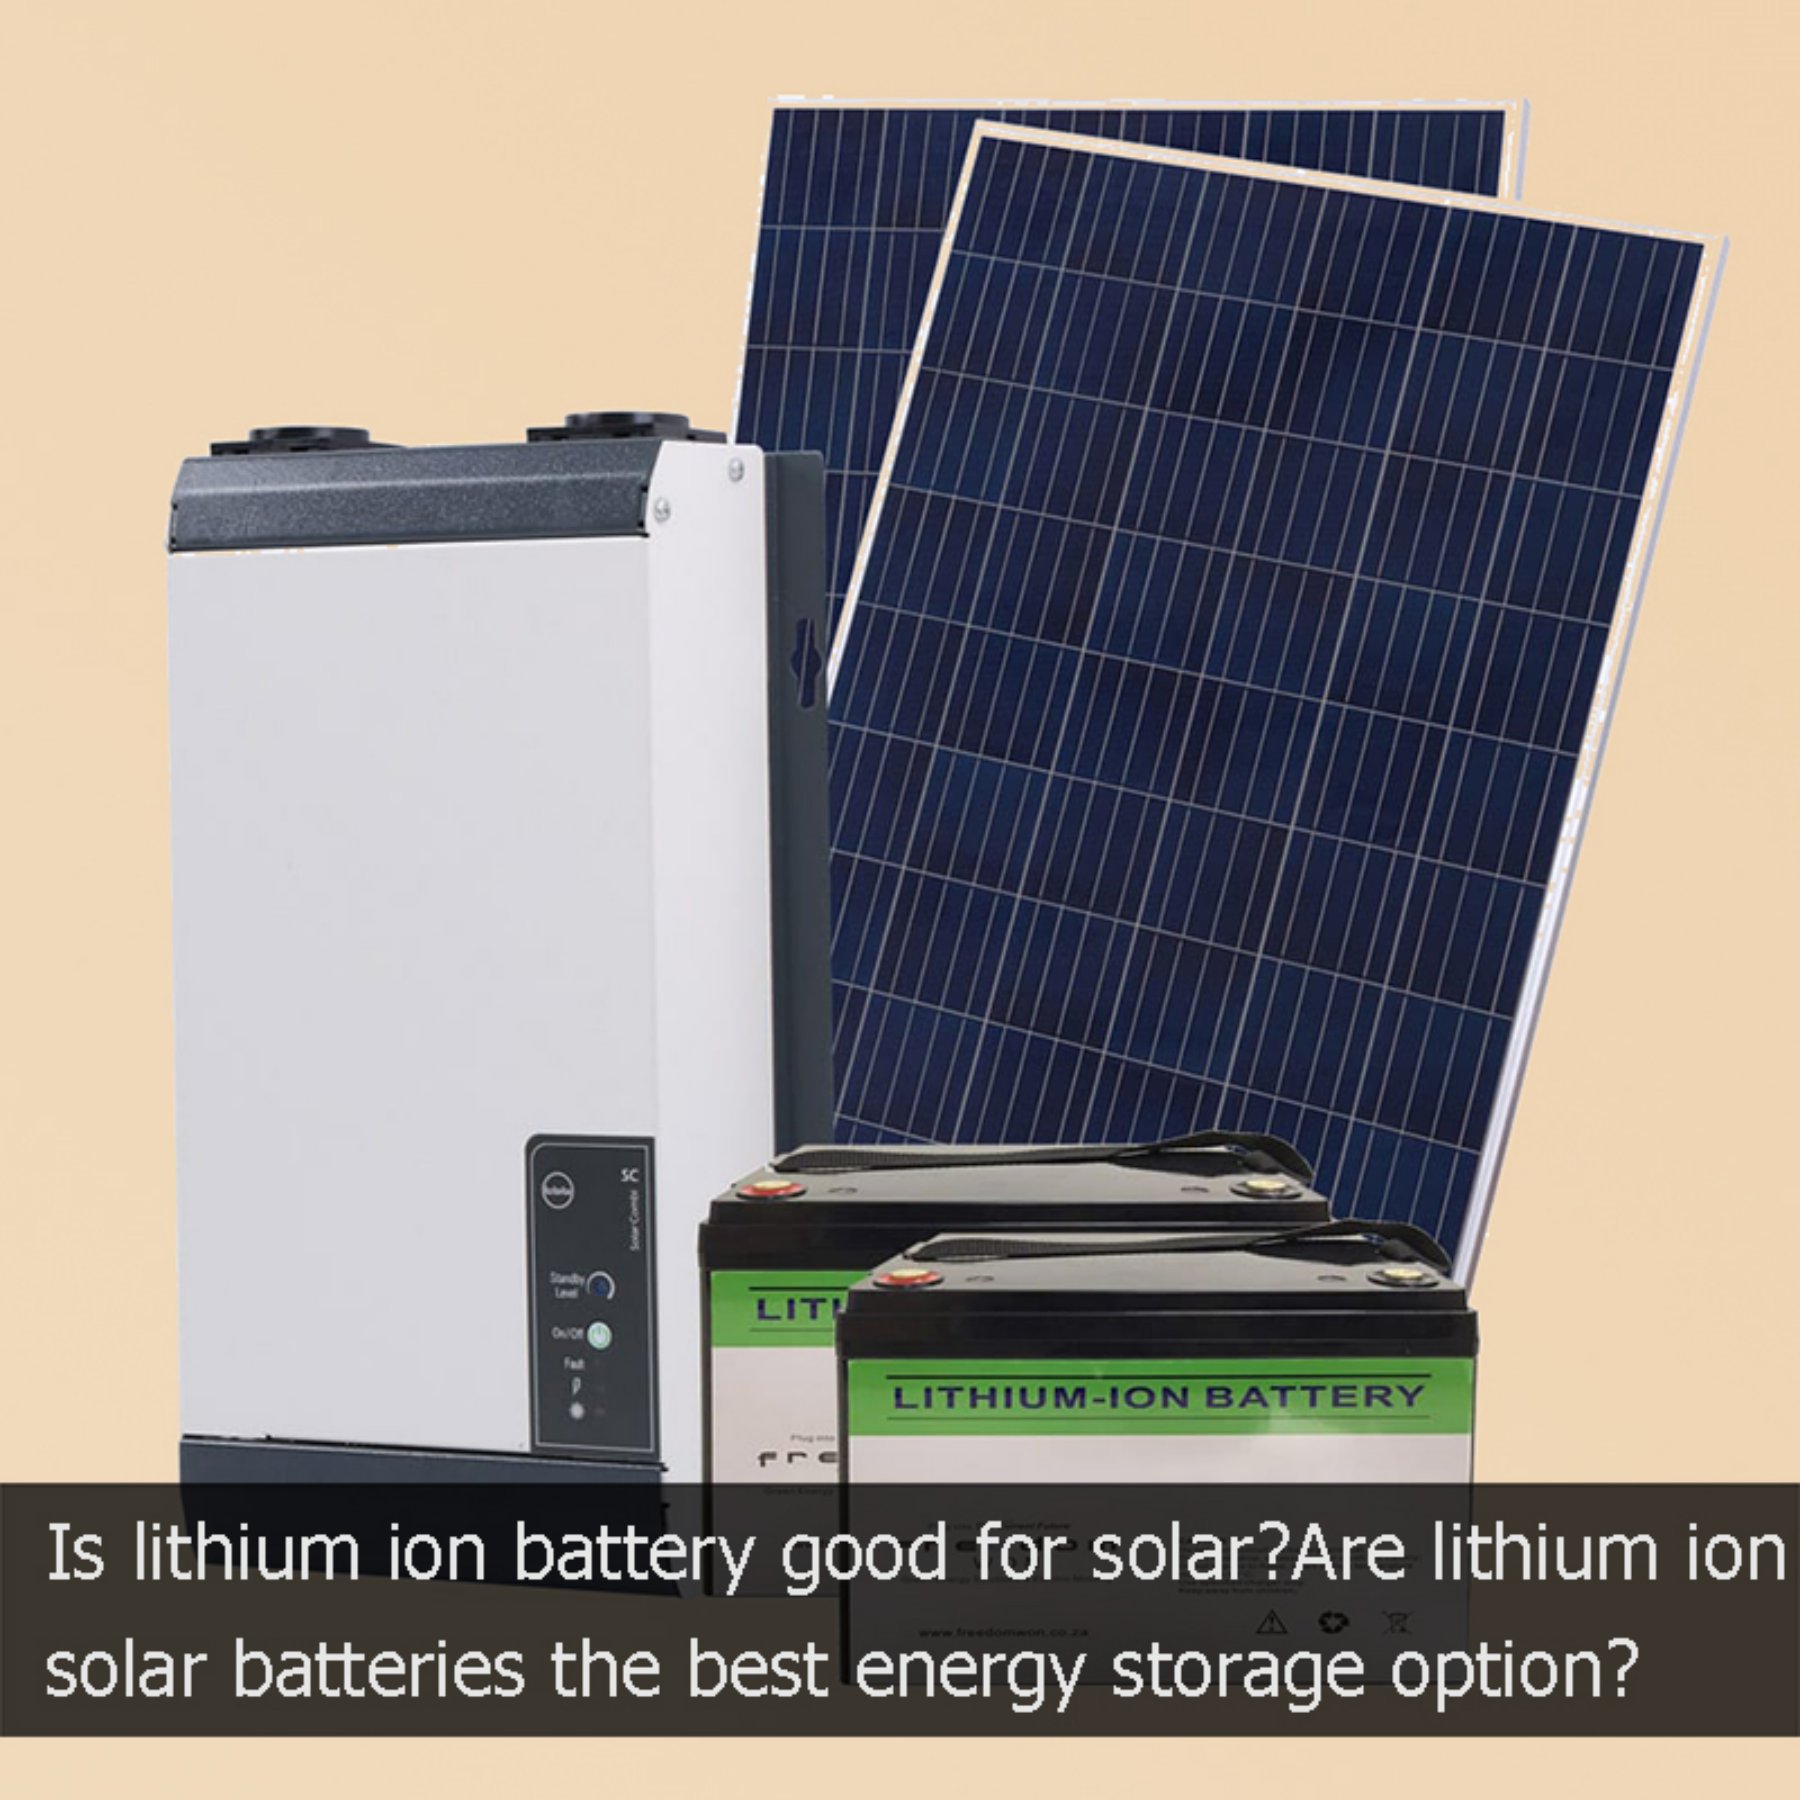 Is lithium ion battery good for solarAre lithium ion solar batteries the best energy storage option